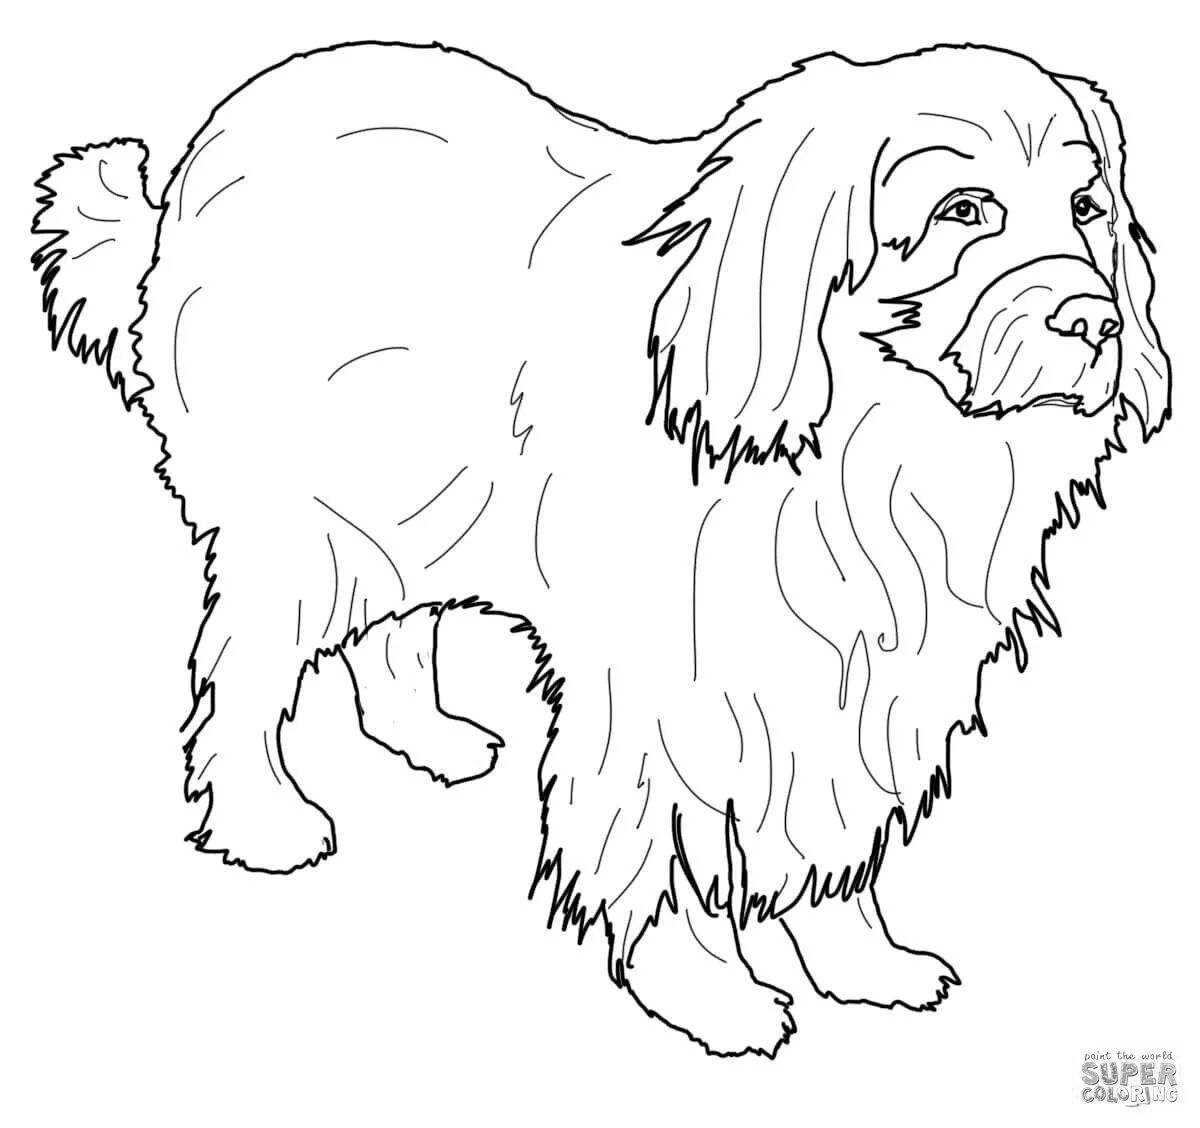 Intelligent coloring pages of dogs of different breeds